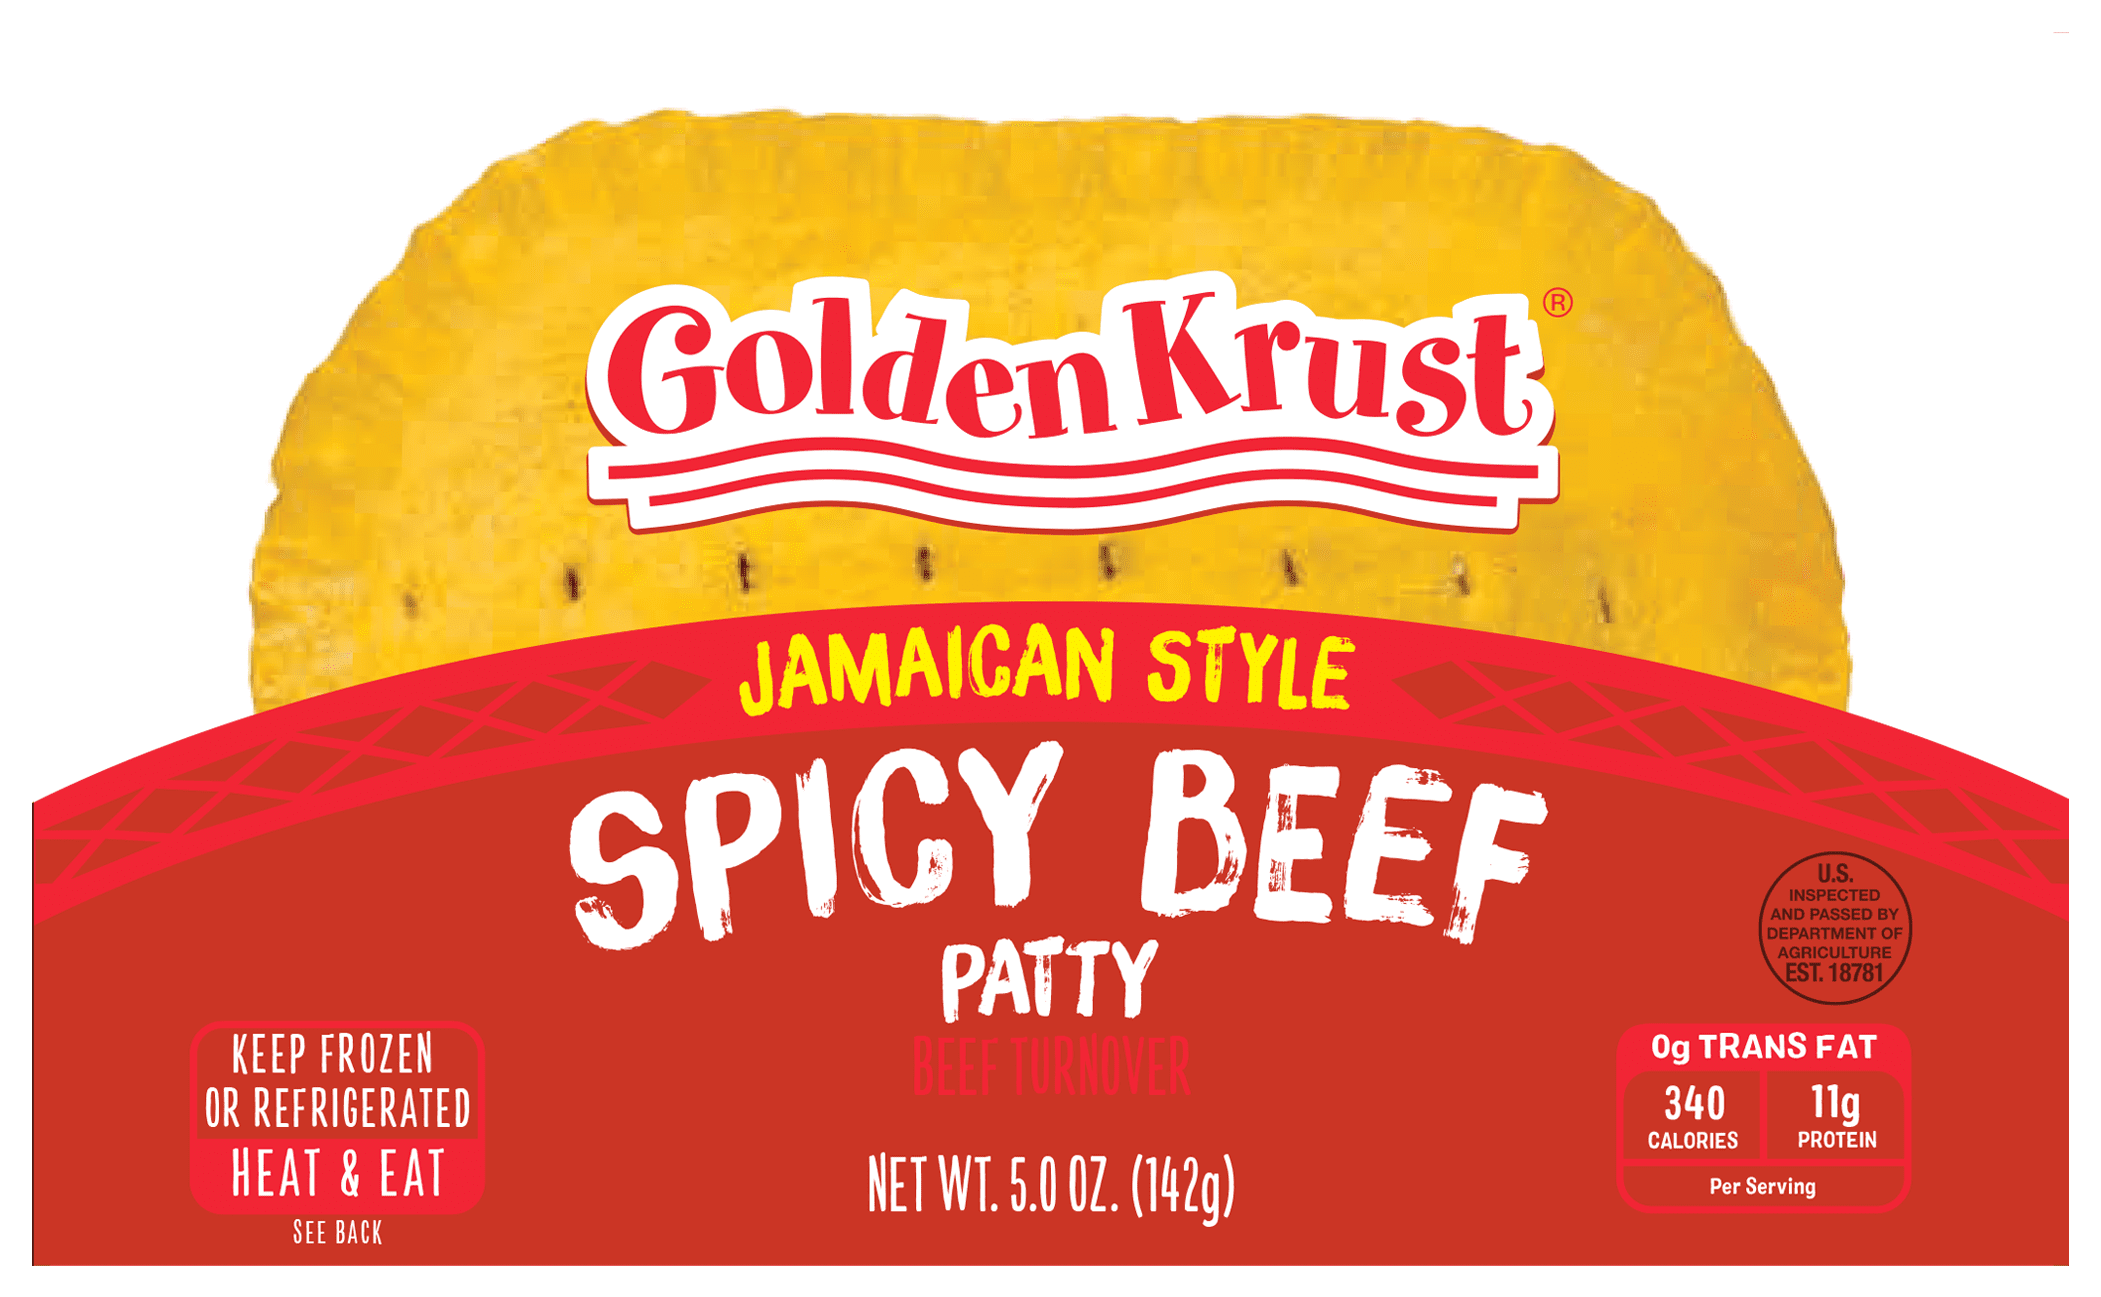 GK Spicy Beef Patty Product